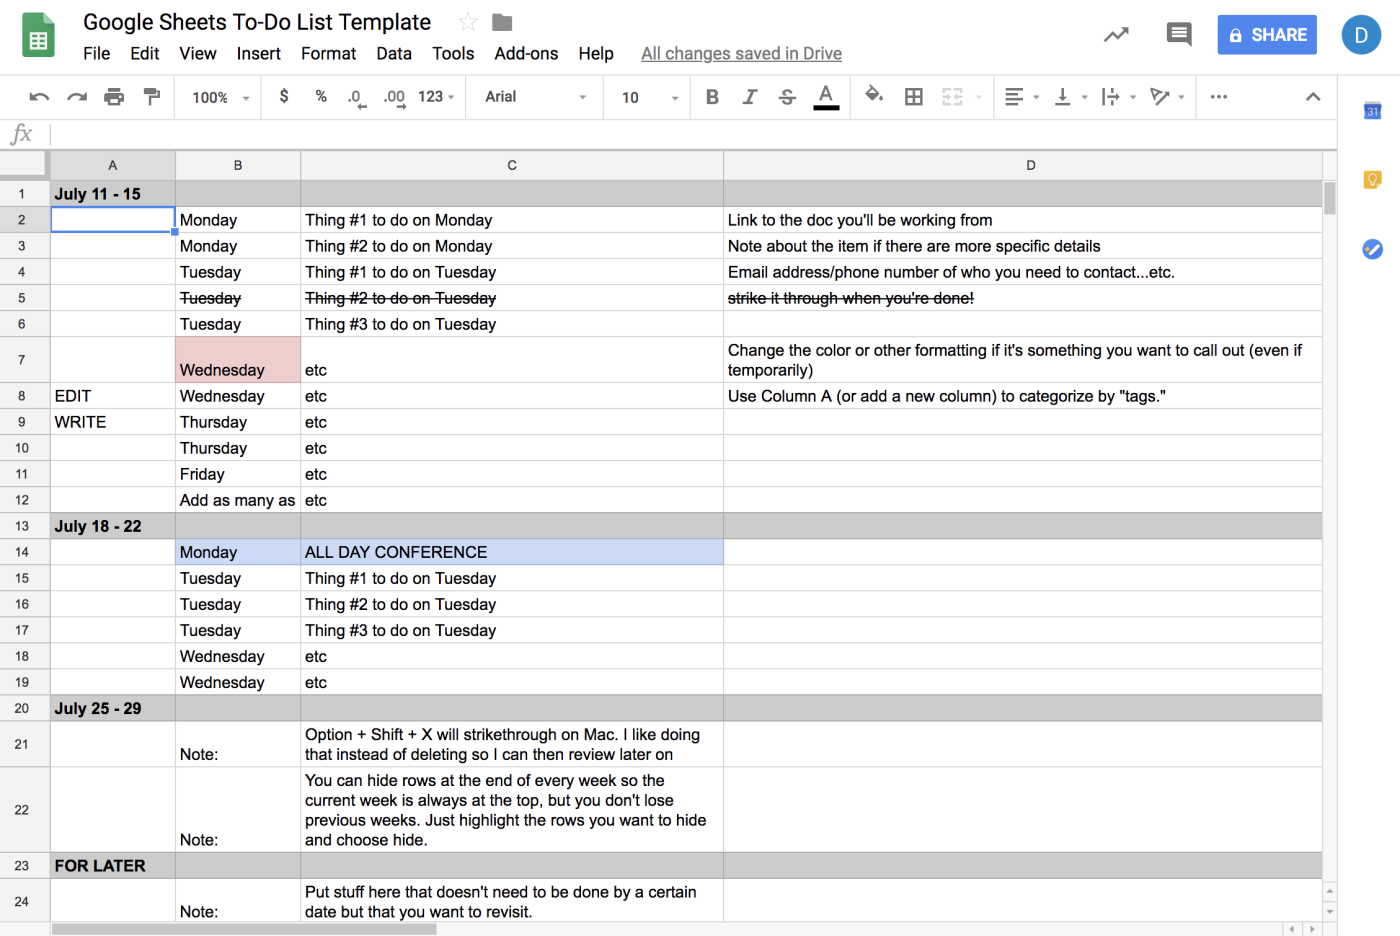 Google Sheets to do list template